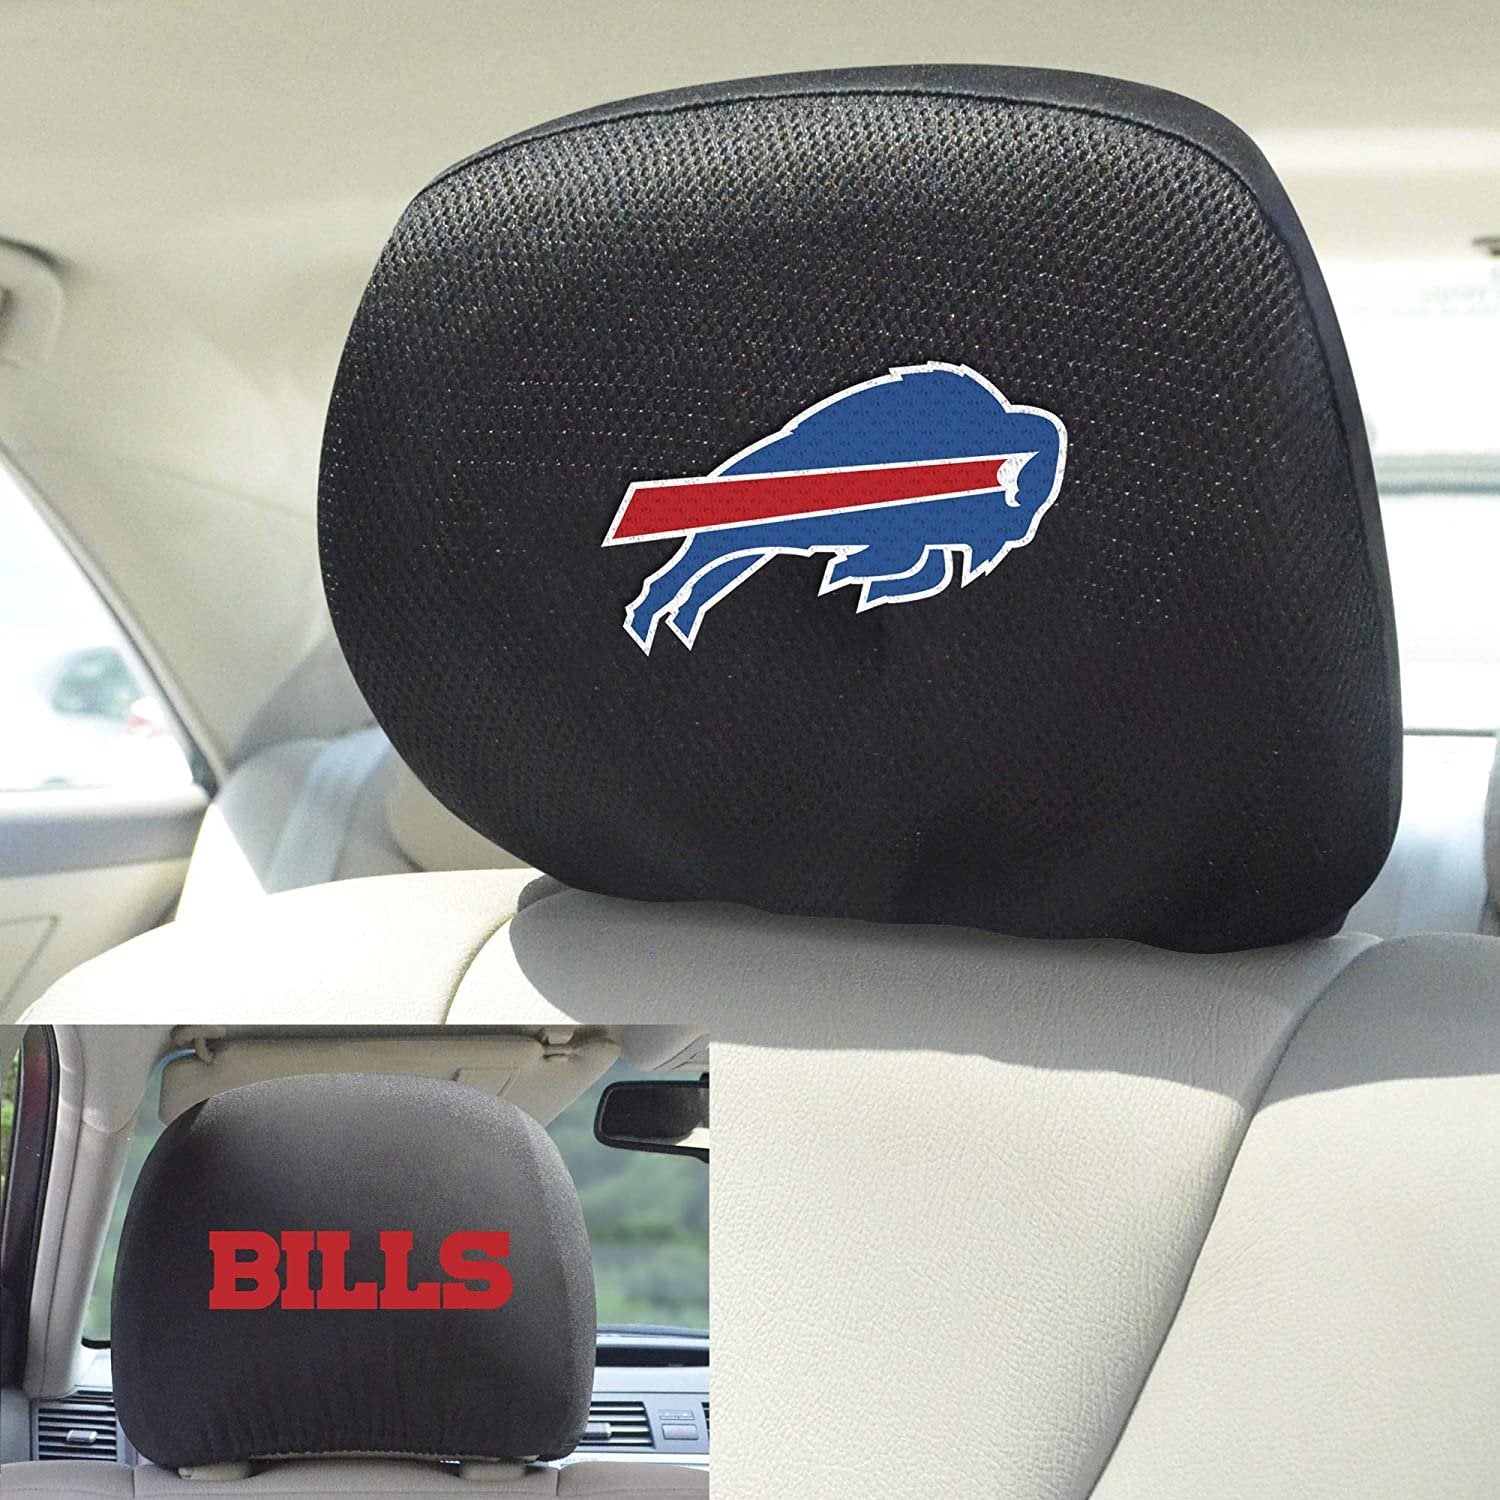 Buffalo Bills Pair of Premium Auto Head Rest Covers, Embroidered, Black Elastic, 14x10 Inch